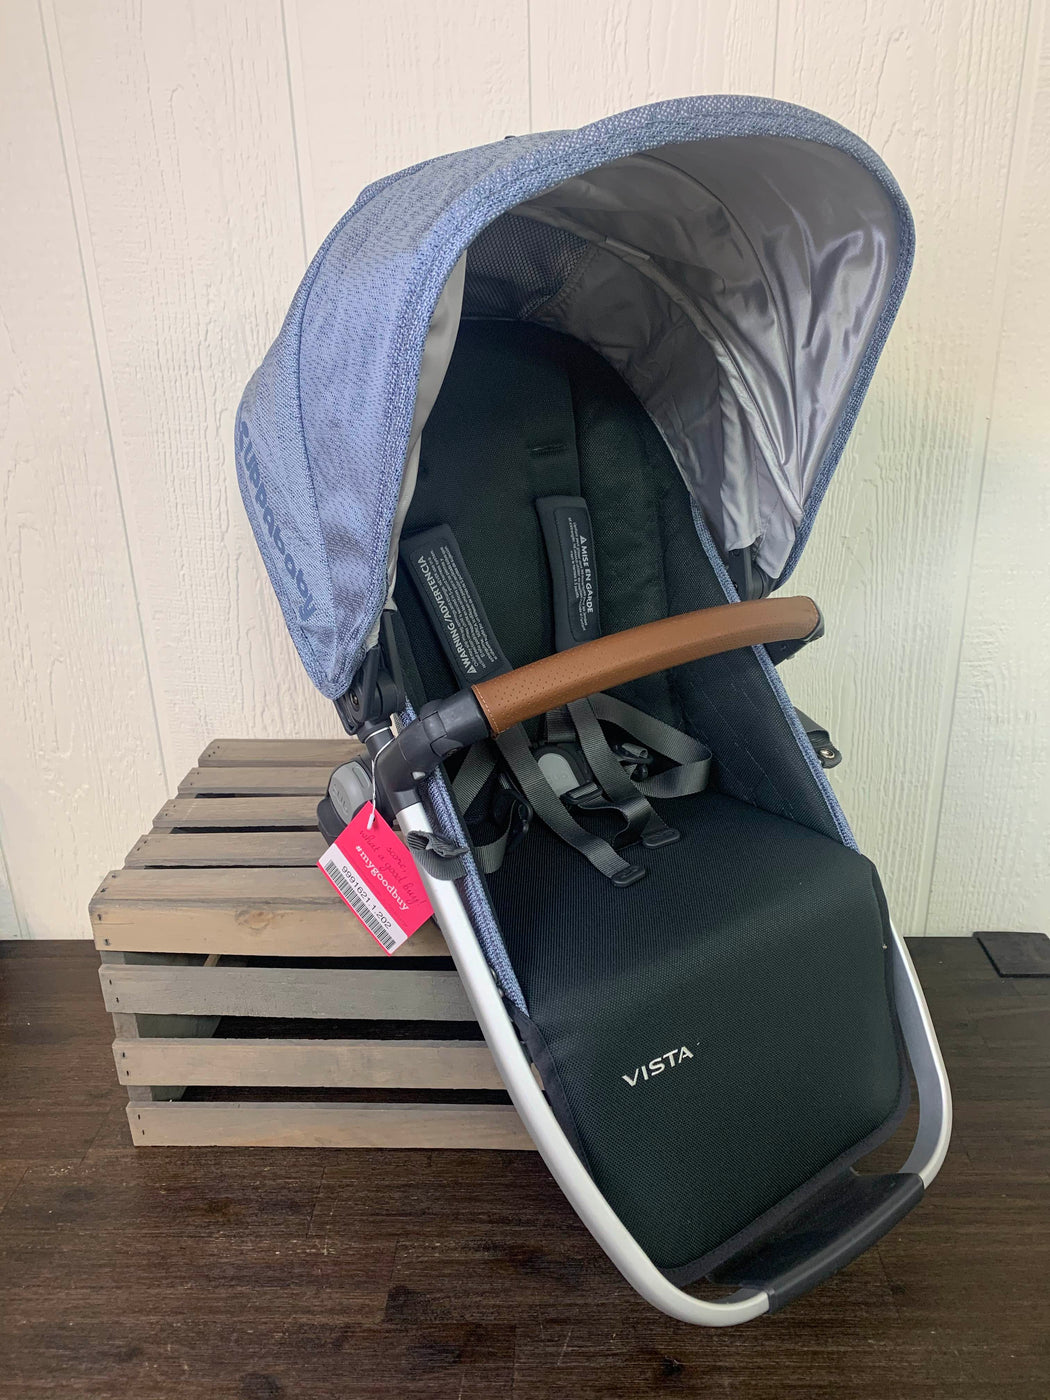 uppababy rumble seat used